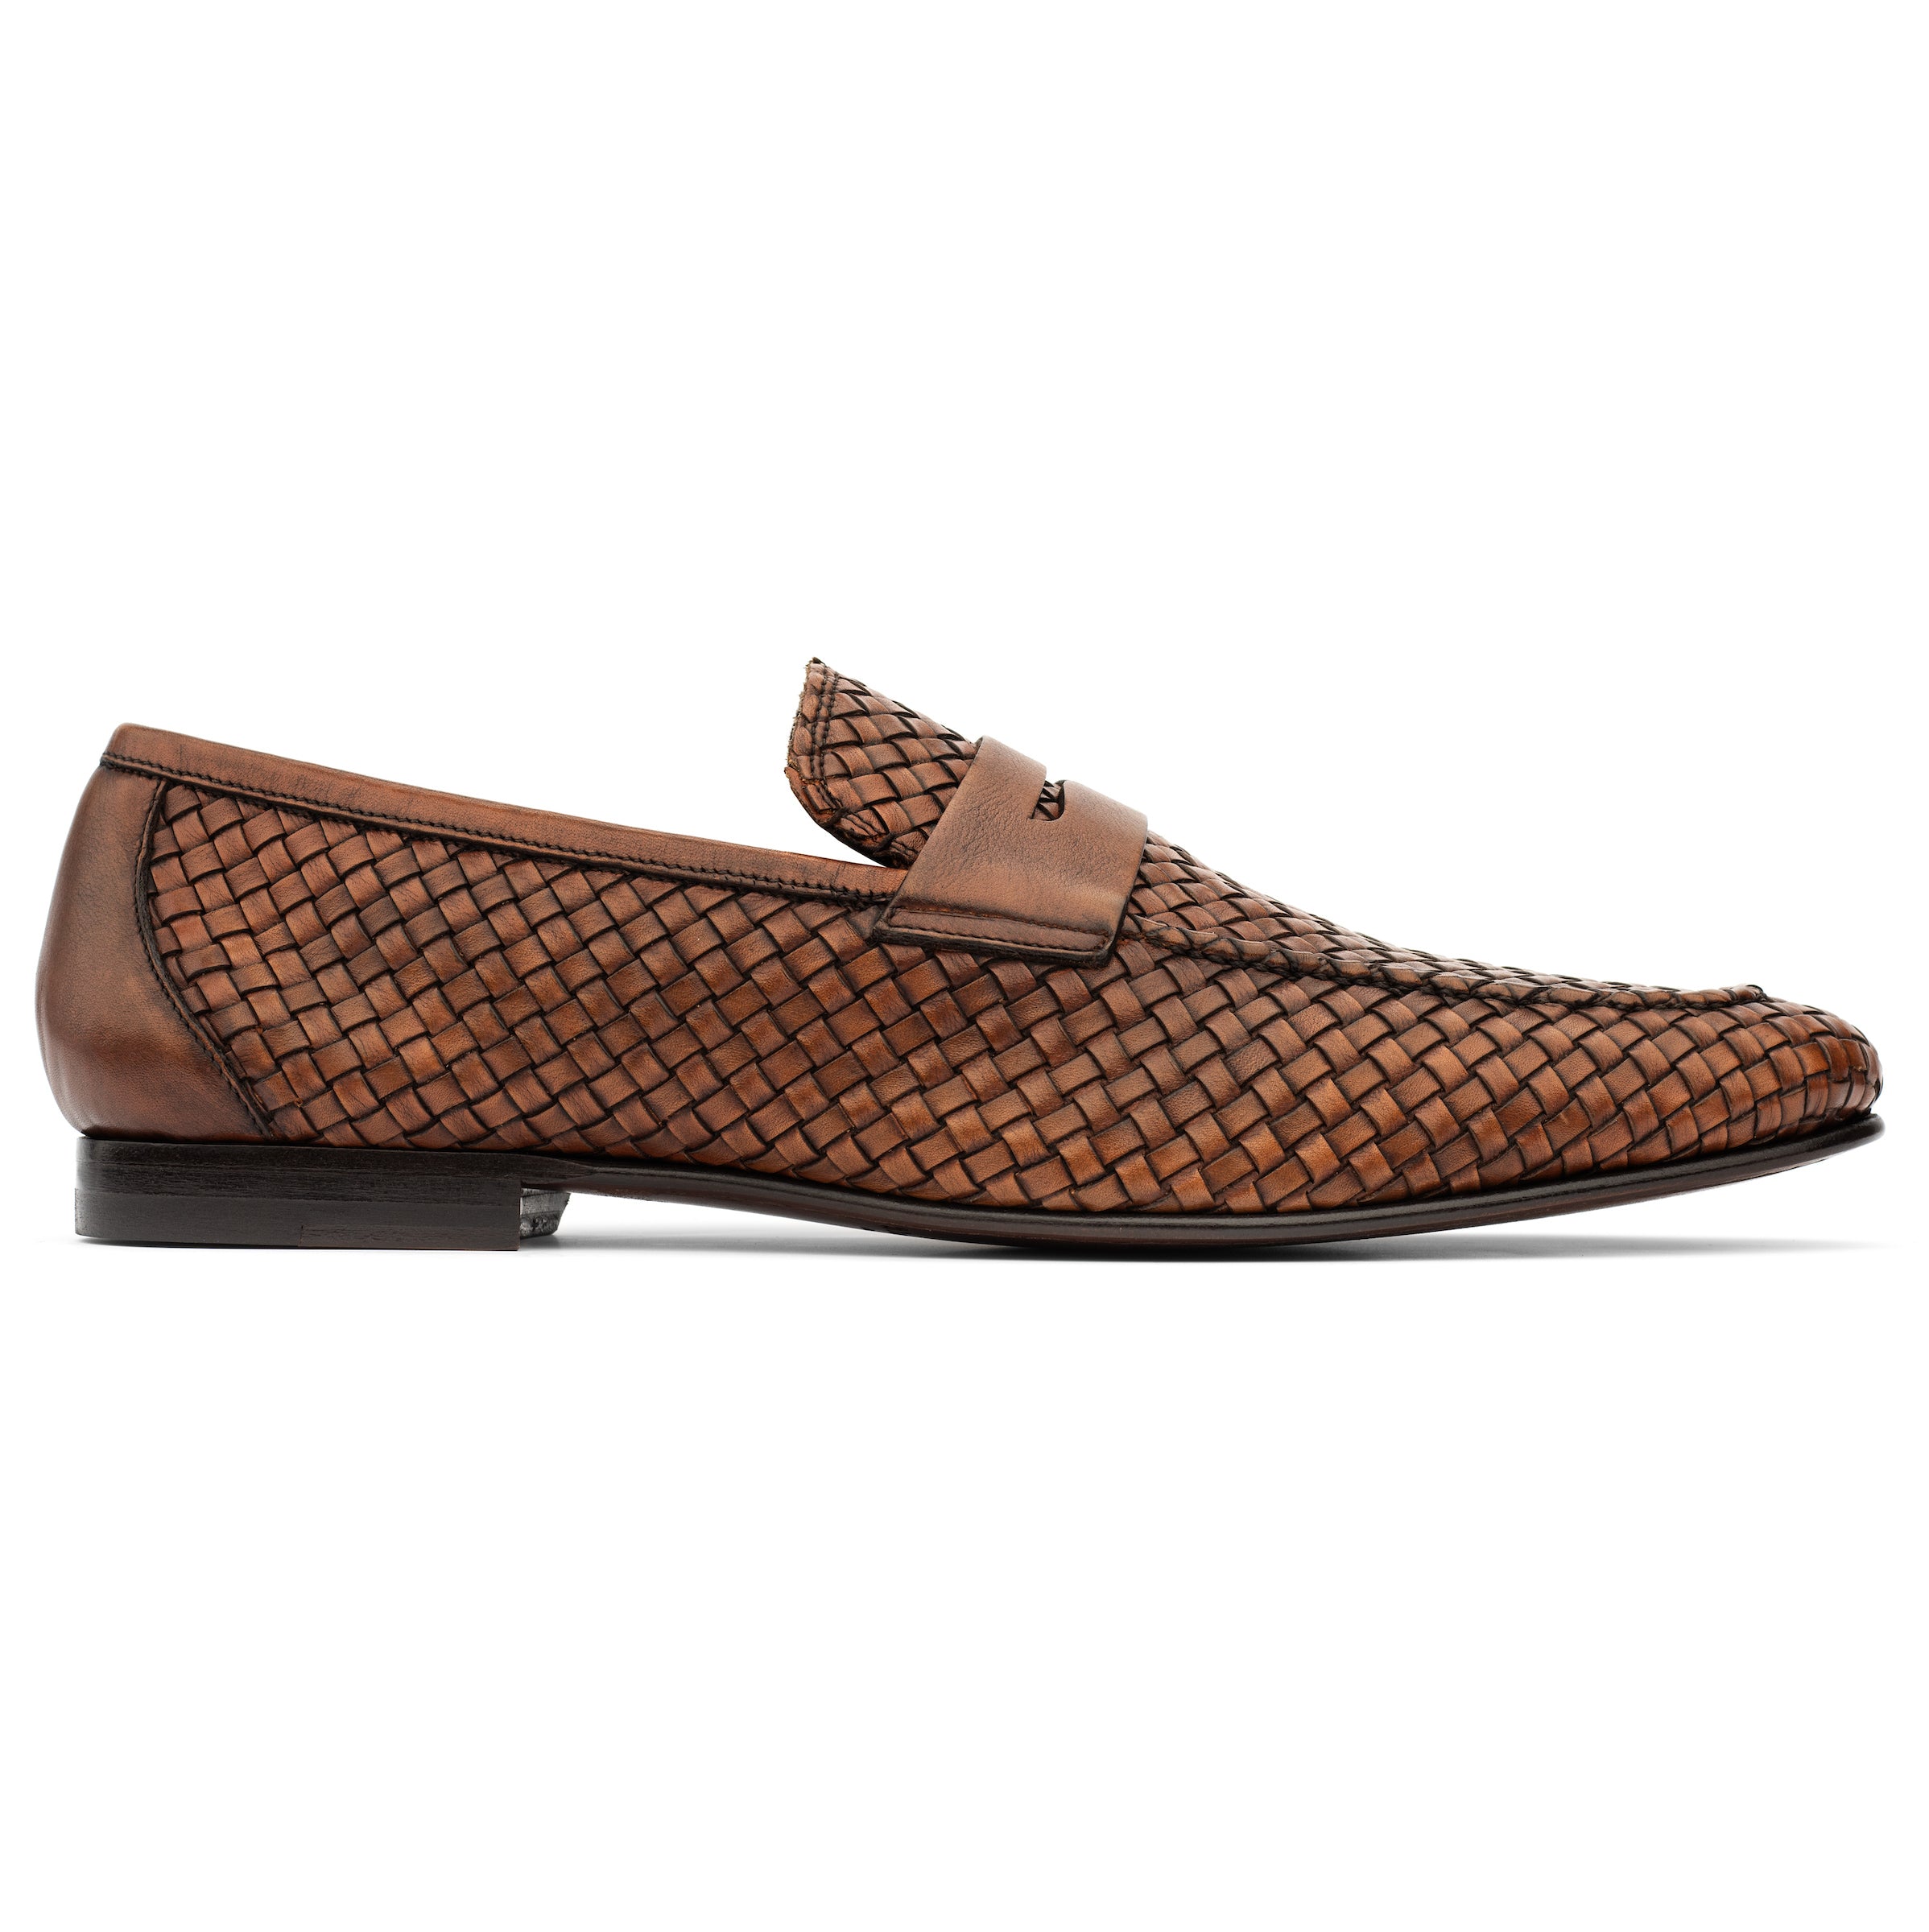 Zenith Cognac Woven Leather Loafer